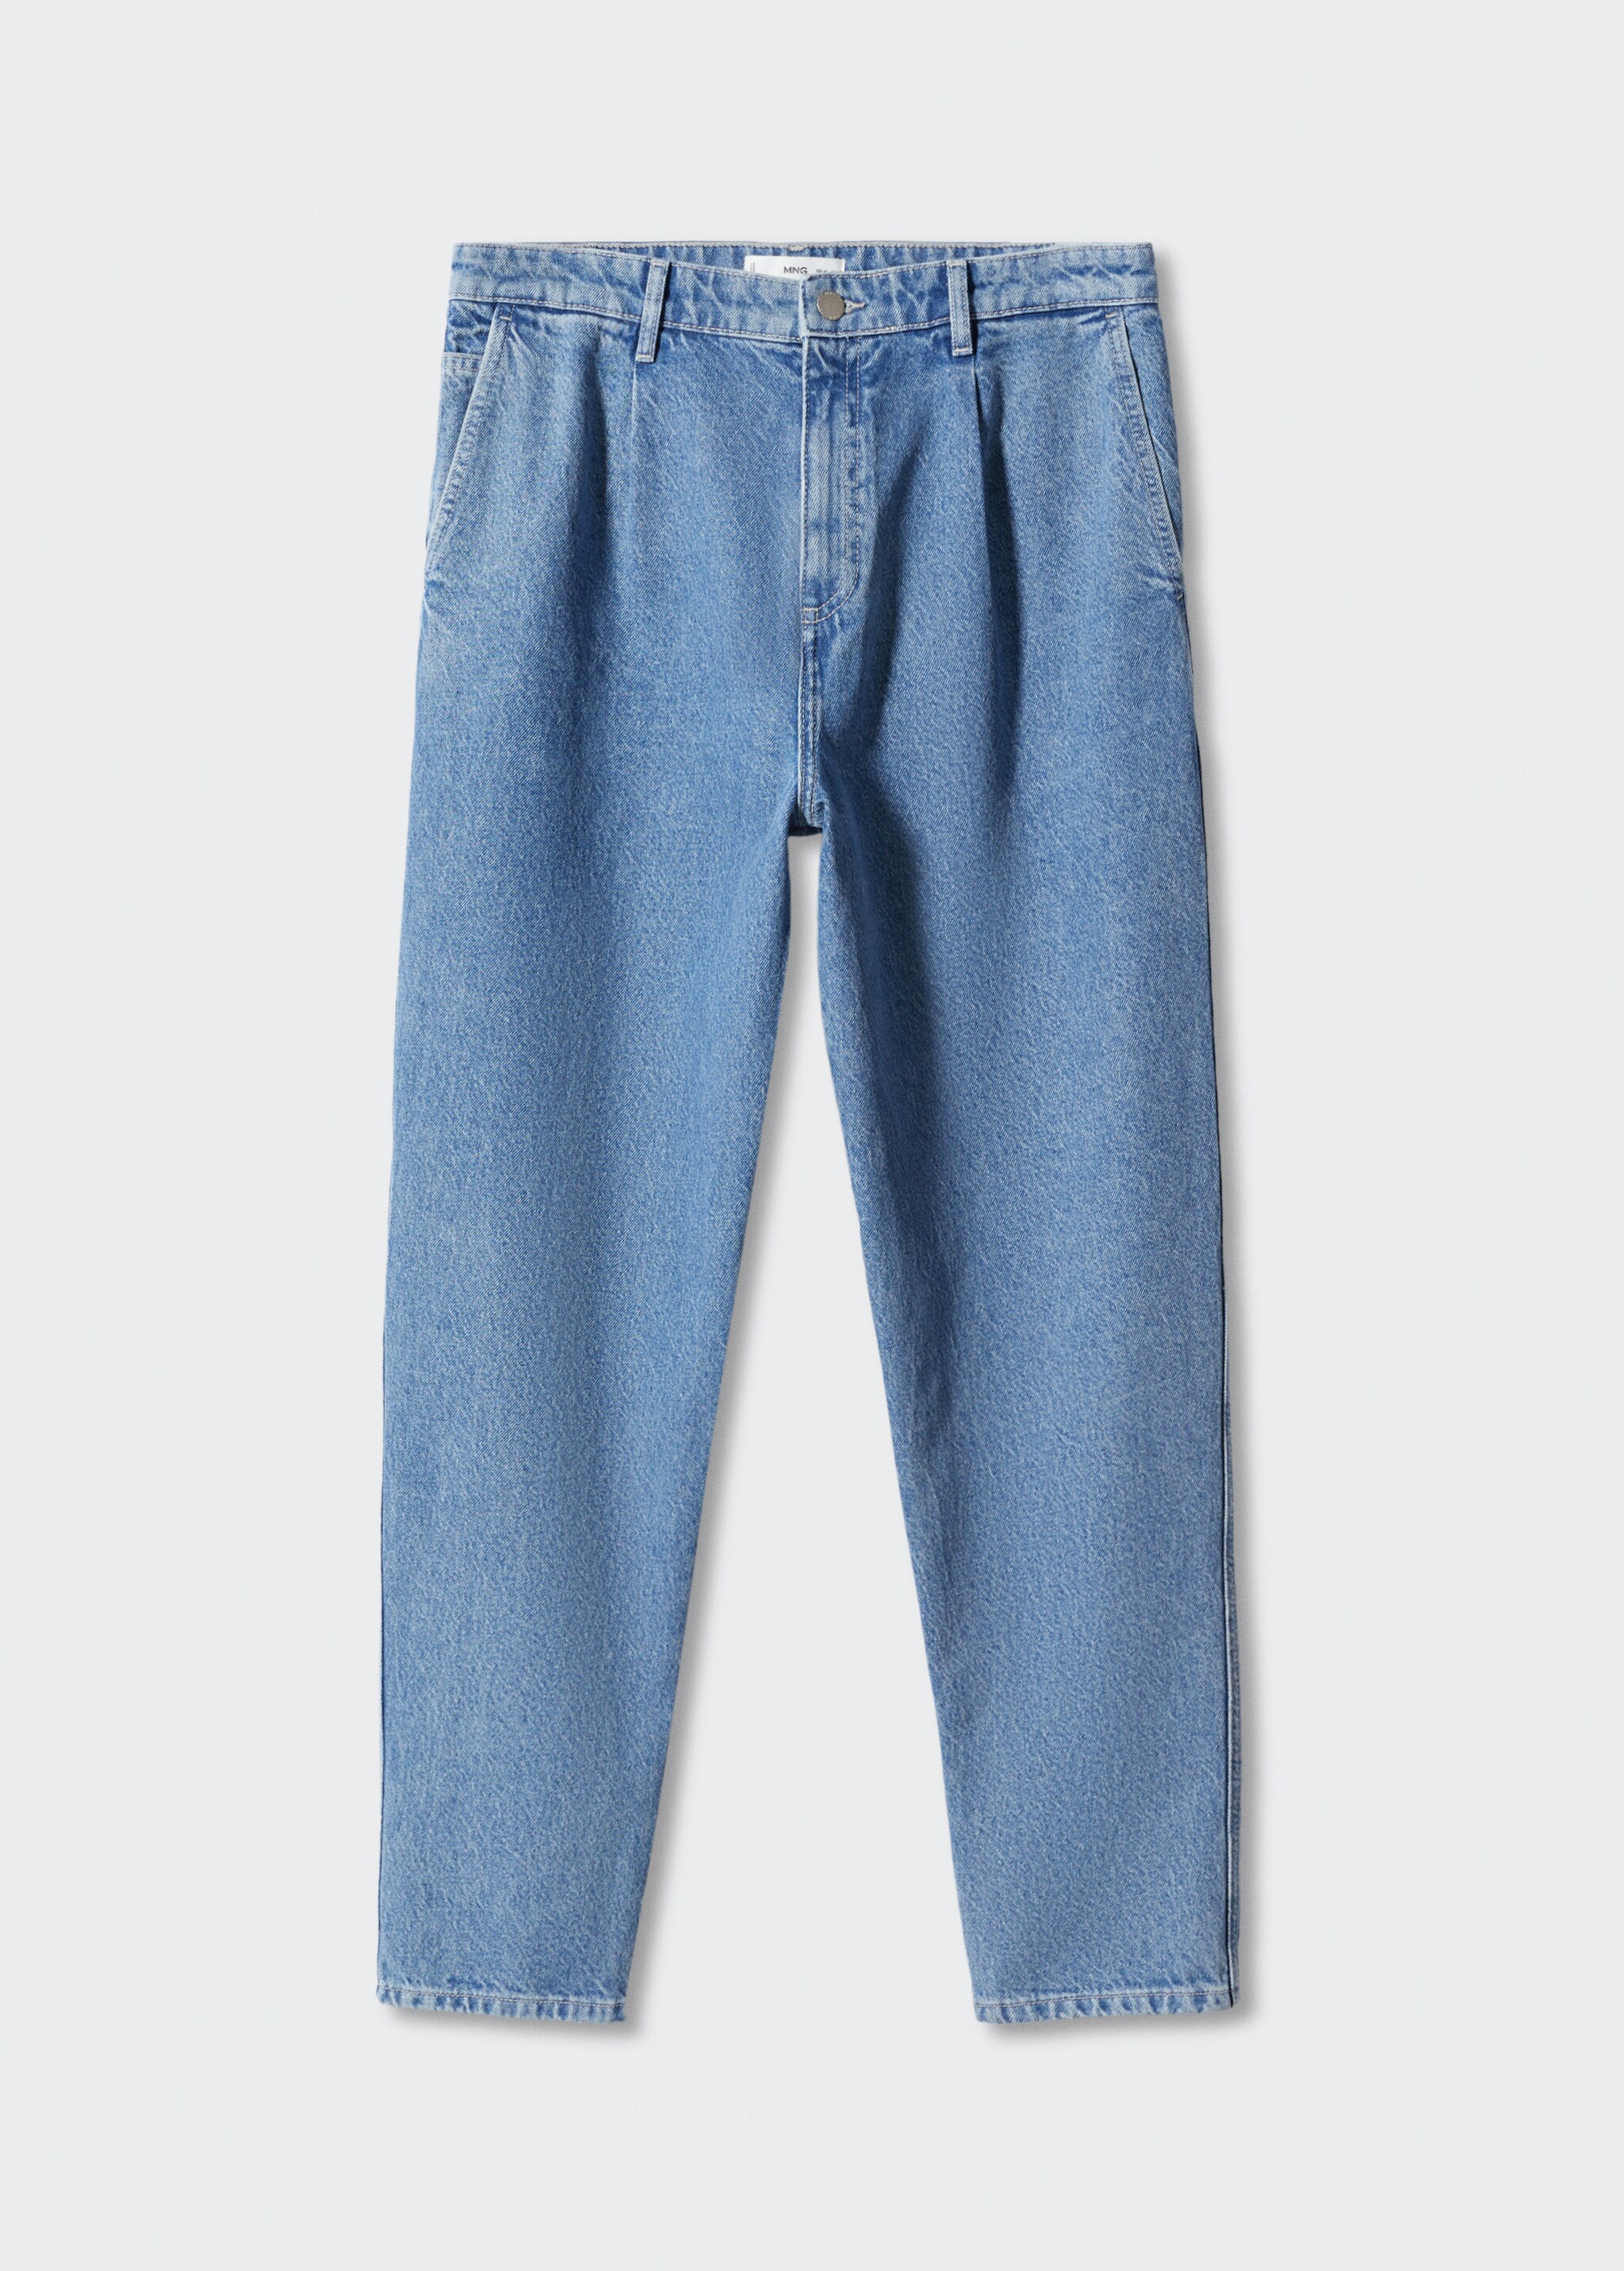 Dart slouchy jeans - Article without model